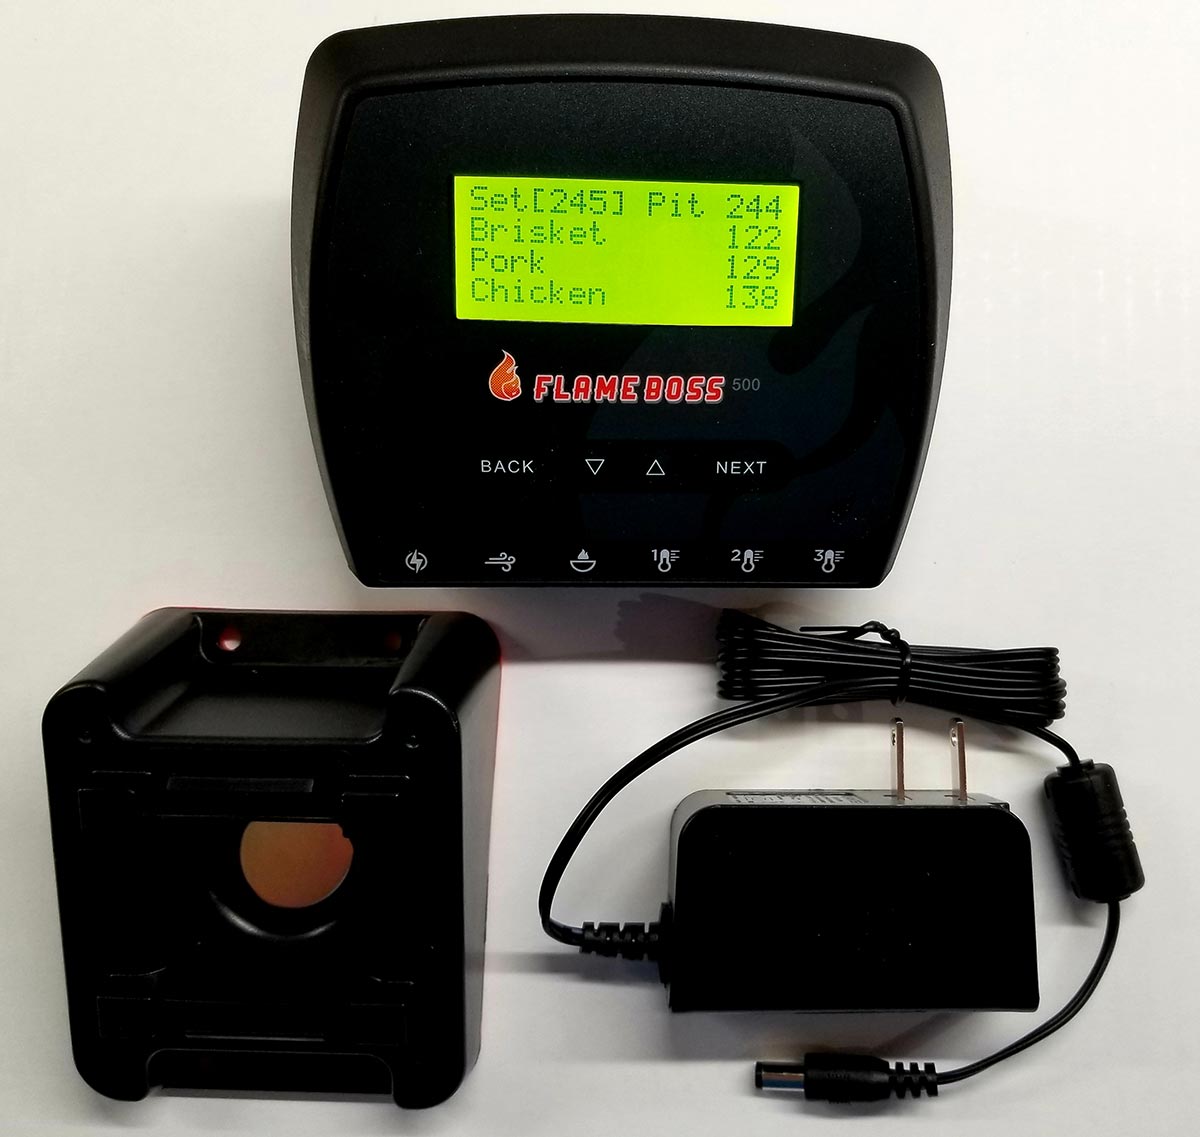 Flame Boss WiFi Thermometer